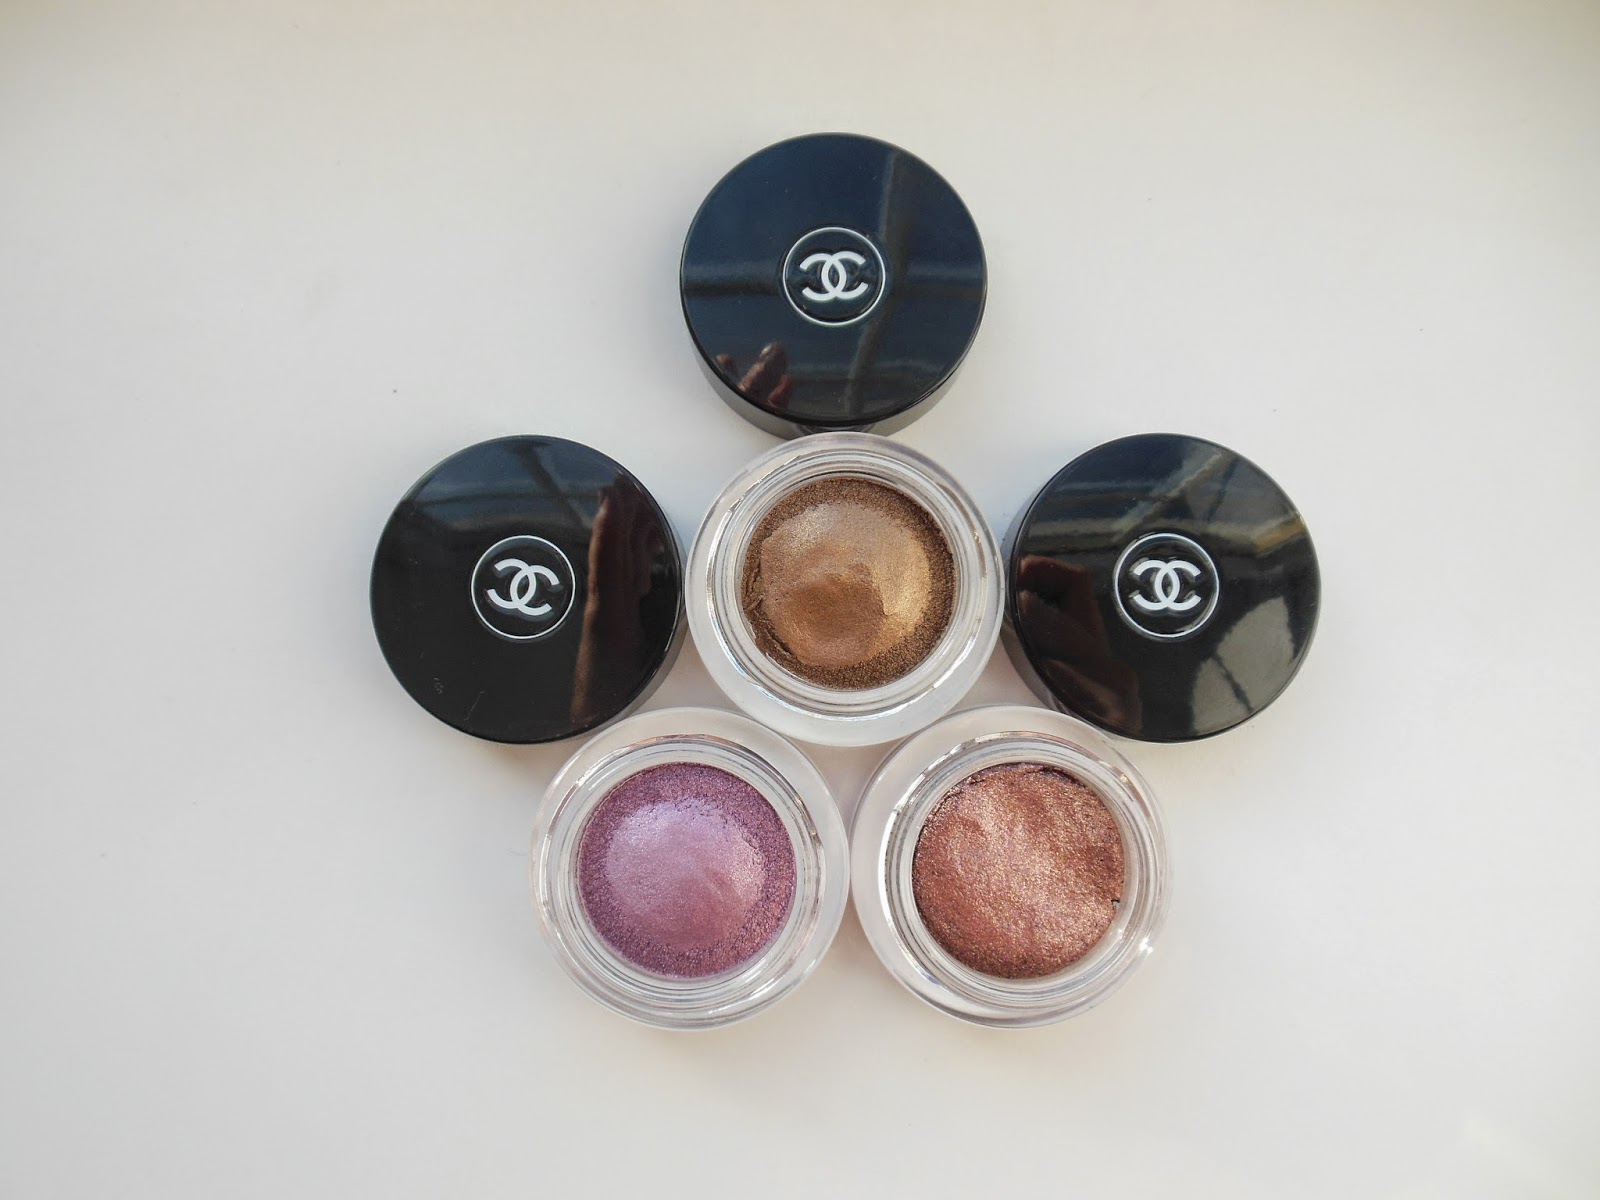 Chanel Mirage (95) Illusion d'Ombre Long Wear Luminous Eyeshadow Review &  Swatches